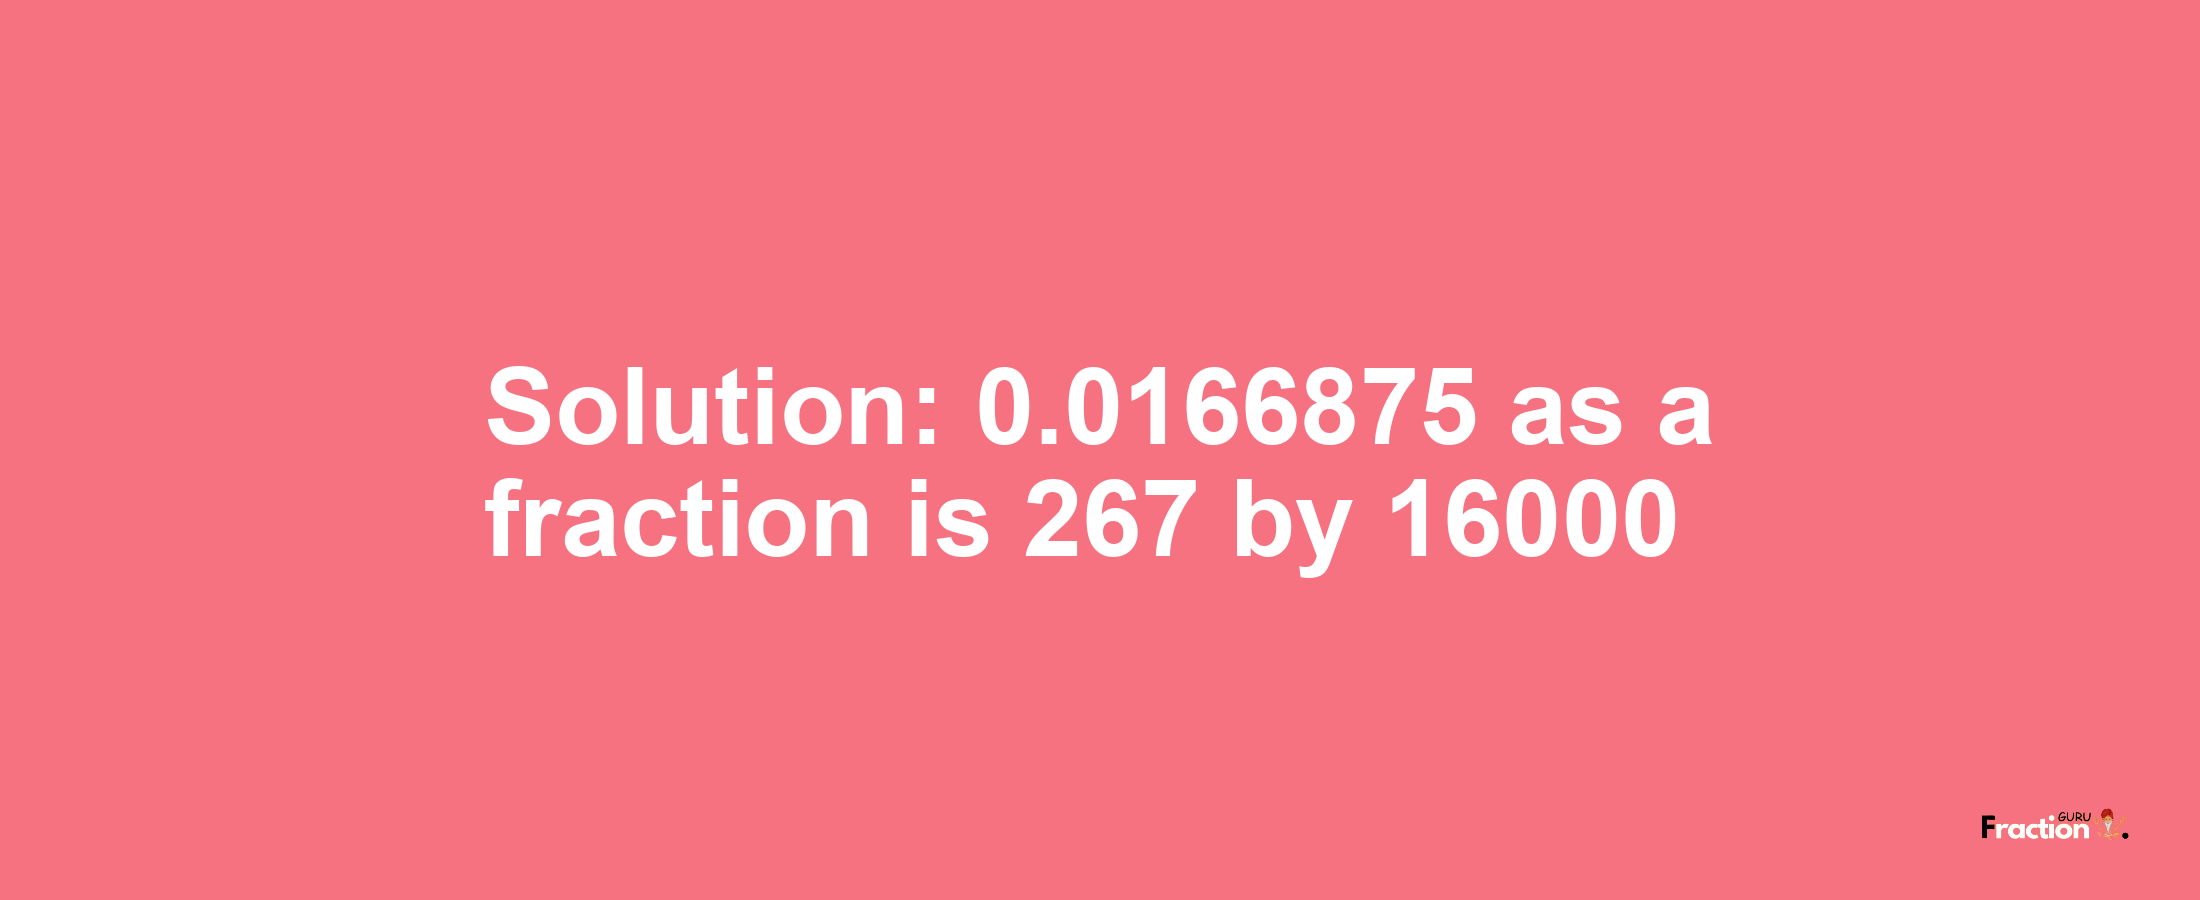 Solution:0.0166875 as a fraction is 267/16000